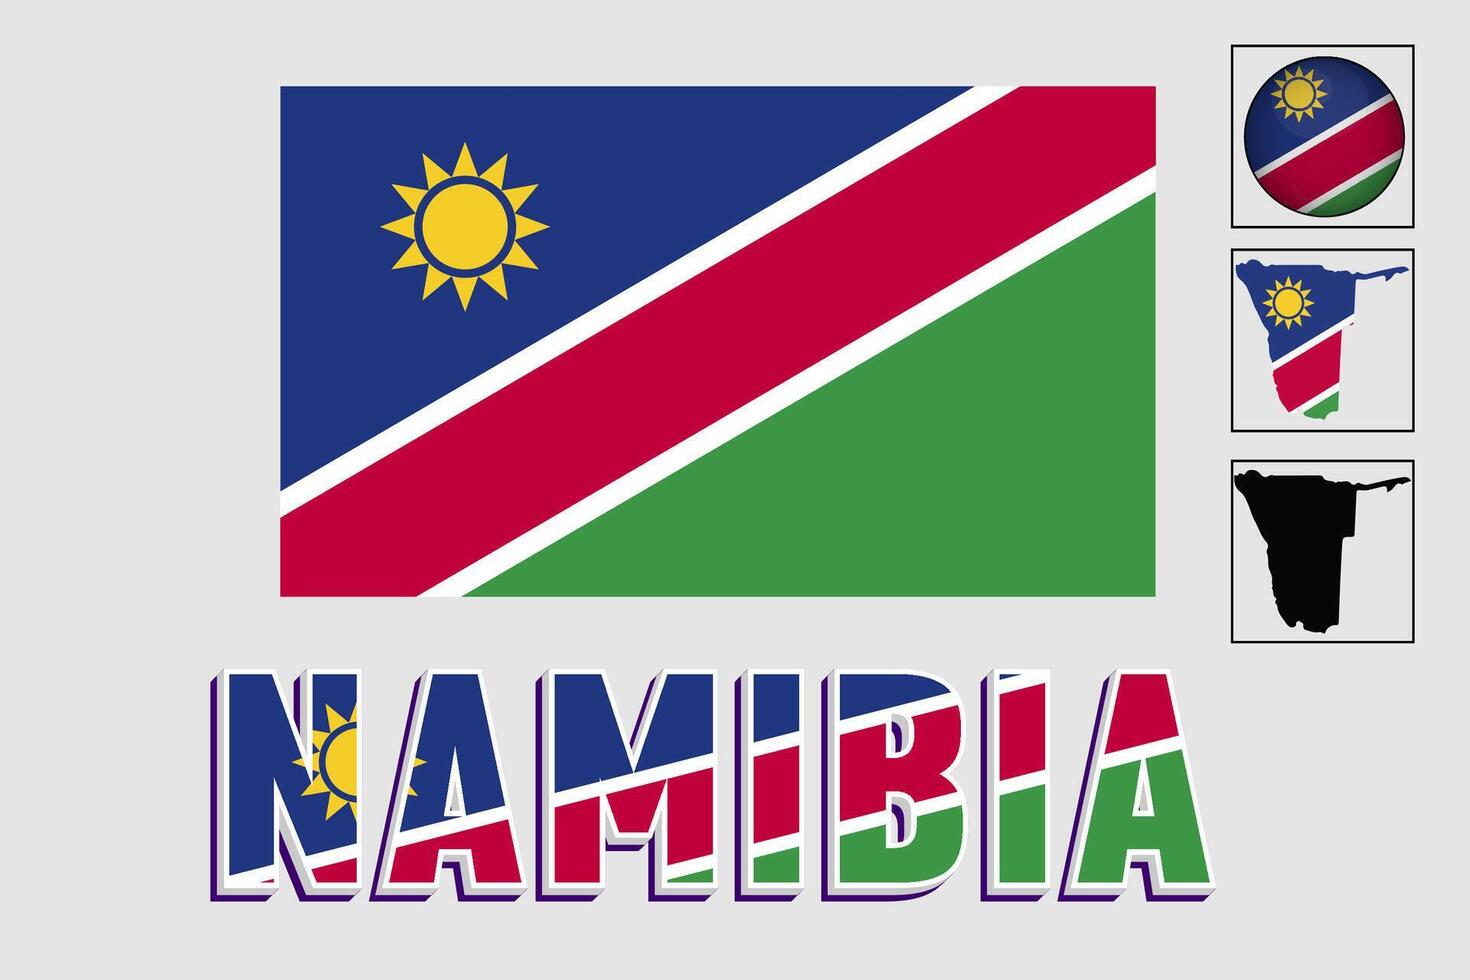 Namibia flag and map in a vector graphic